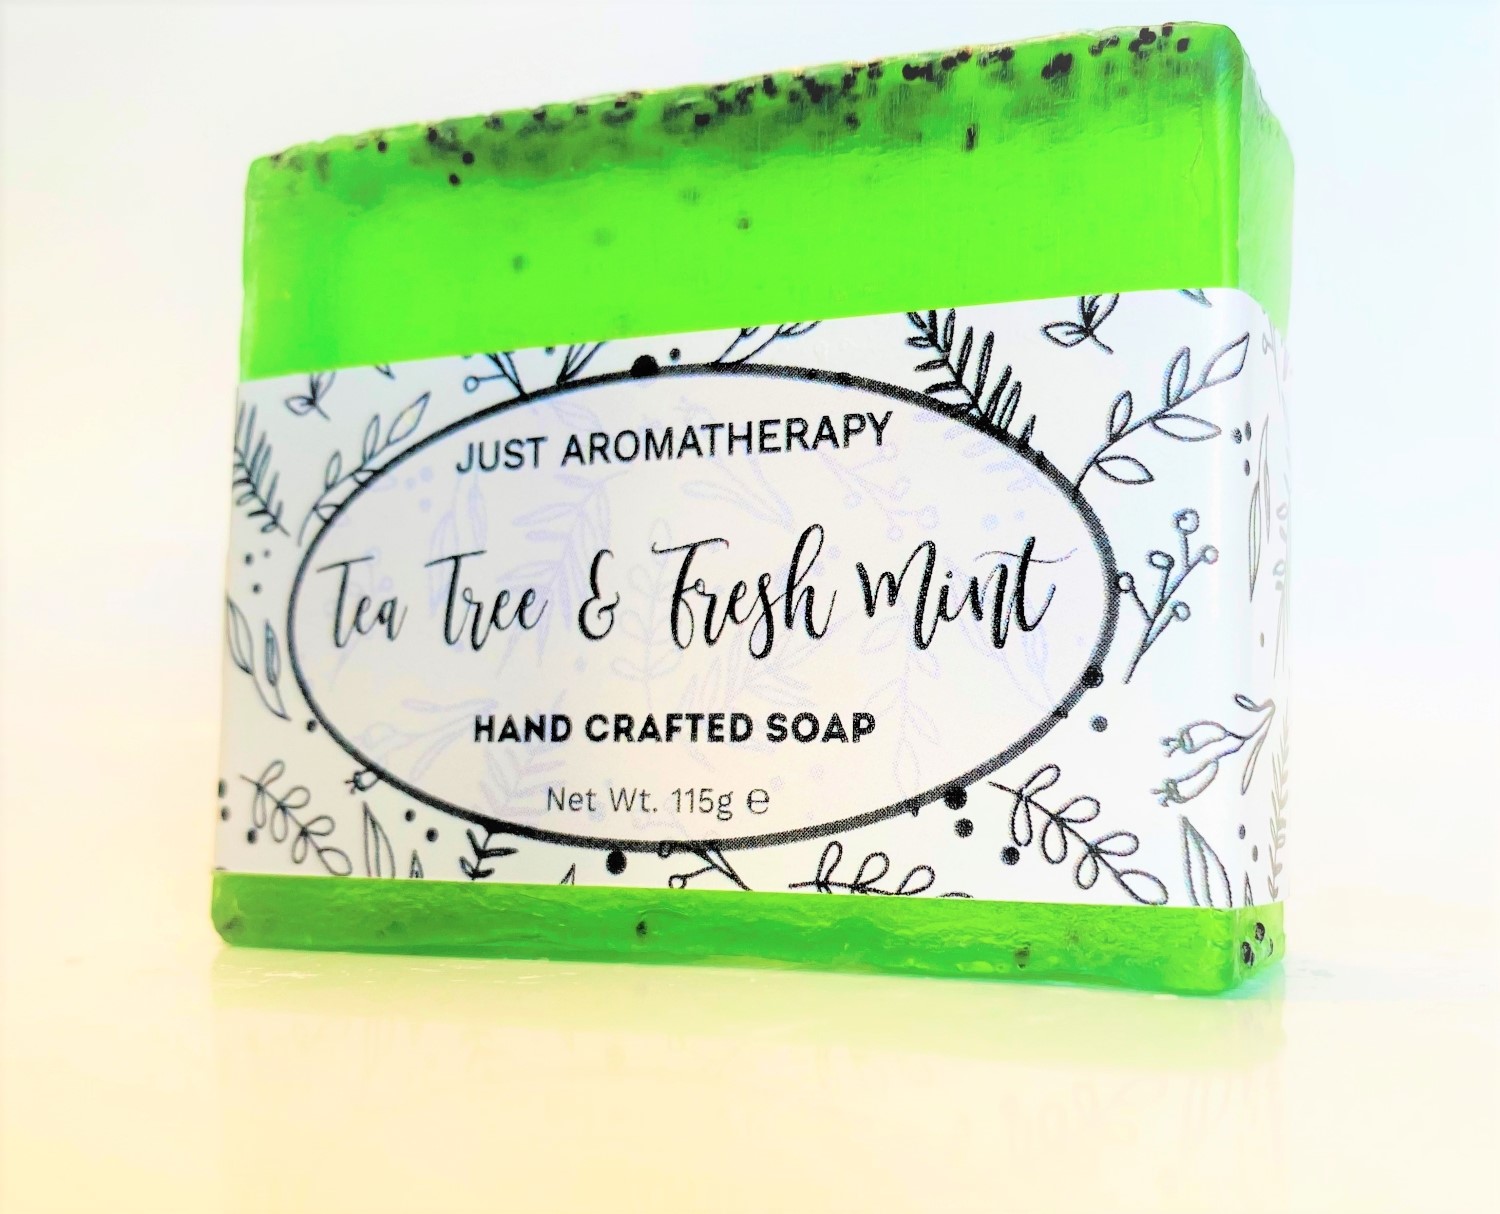 Tea Tree & Fresh Mint - Wild & Natural Hand Crafted Soap